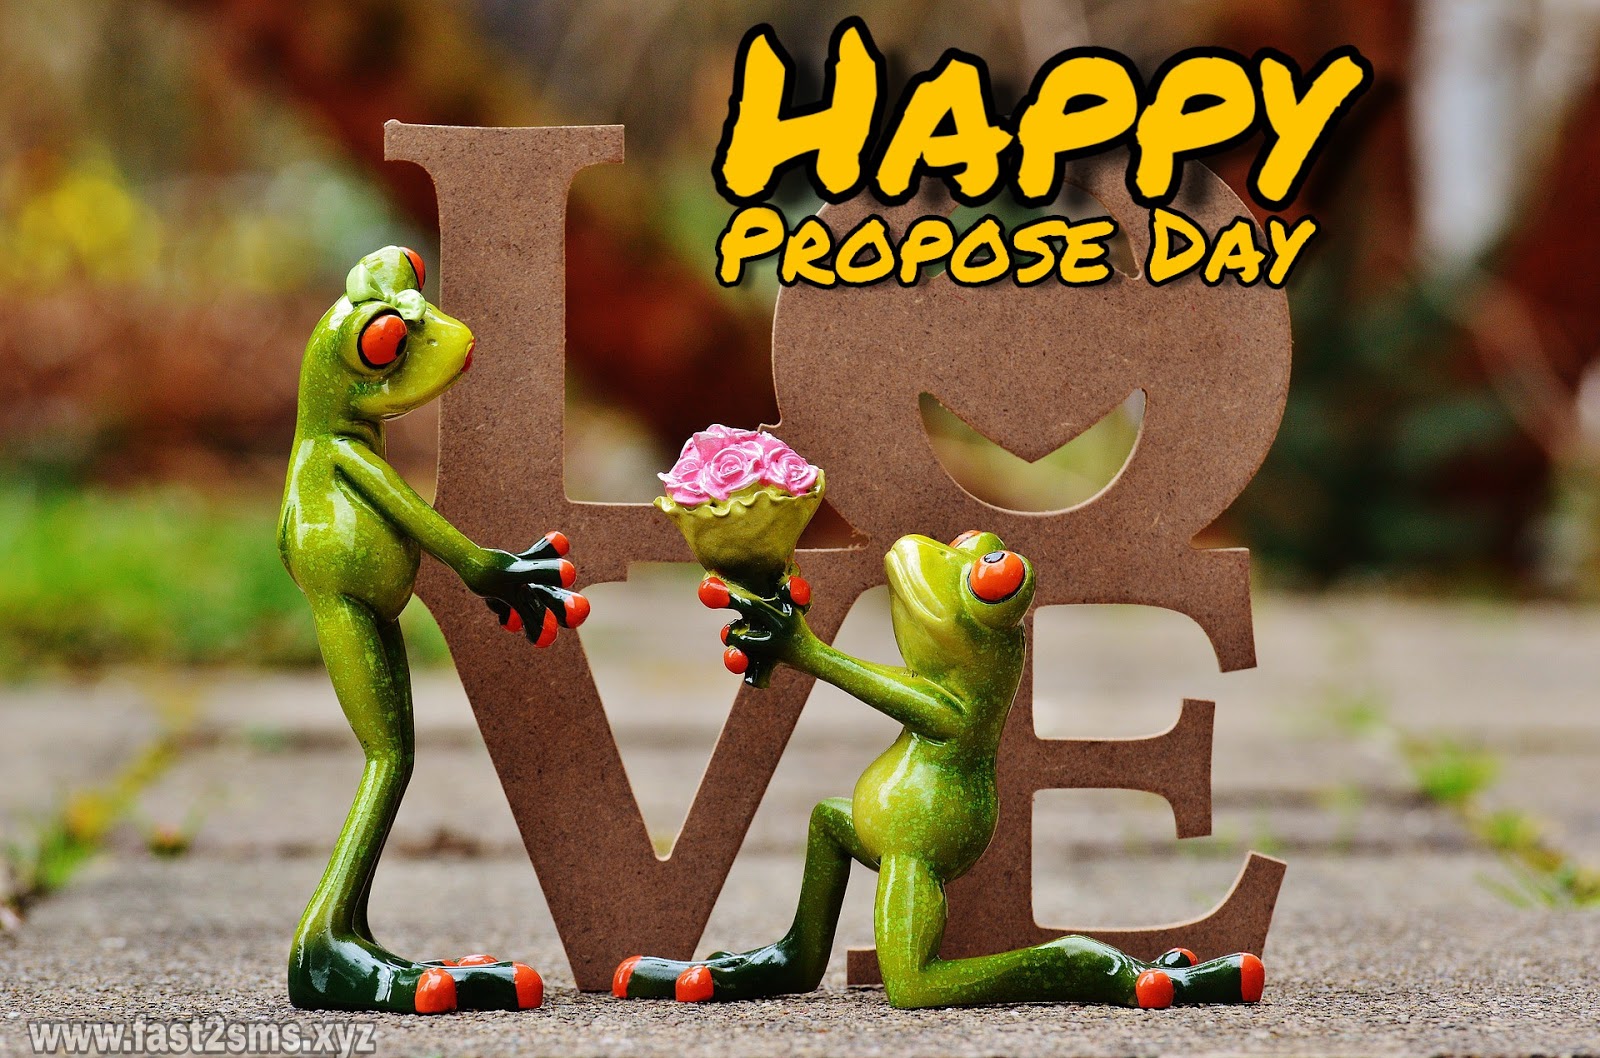 Happy propose day images | Propose day images download by Fast2smsxyz